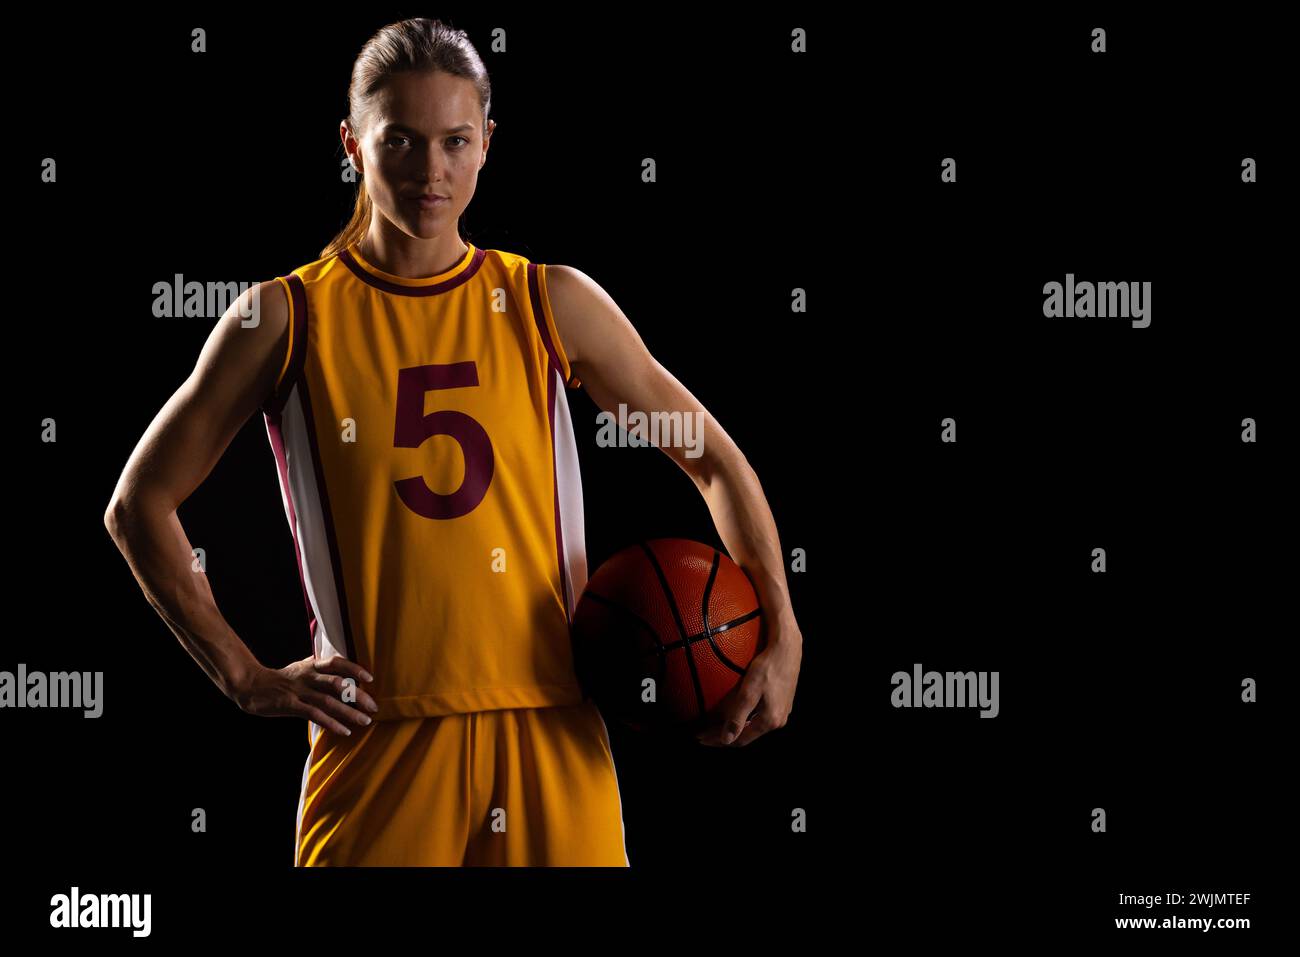 Athletic woman in basketball gear shows determination on black background. Stock Photo